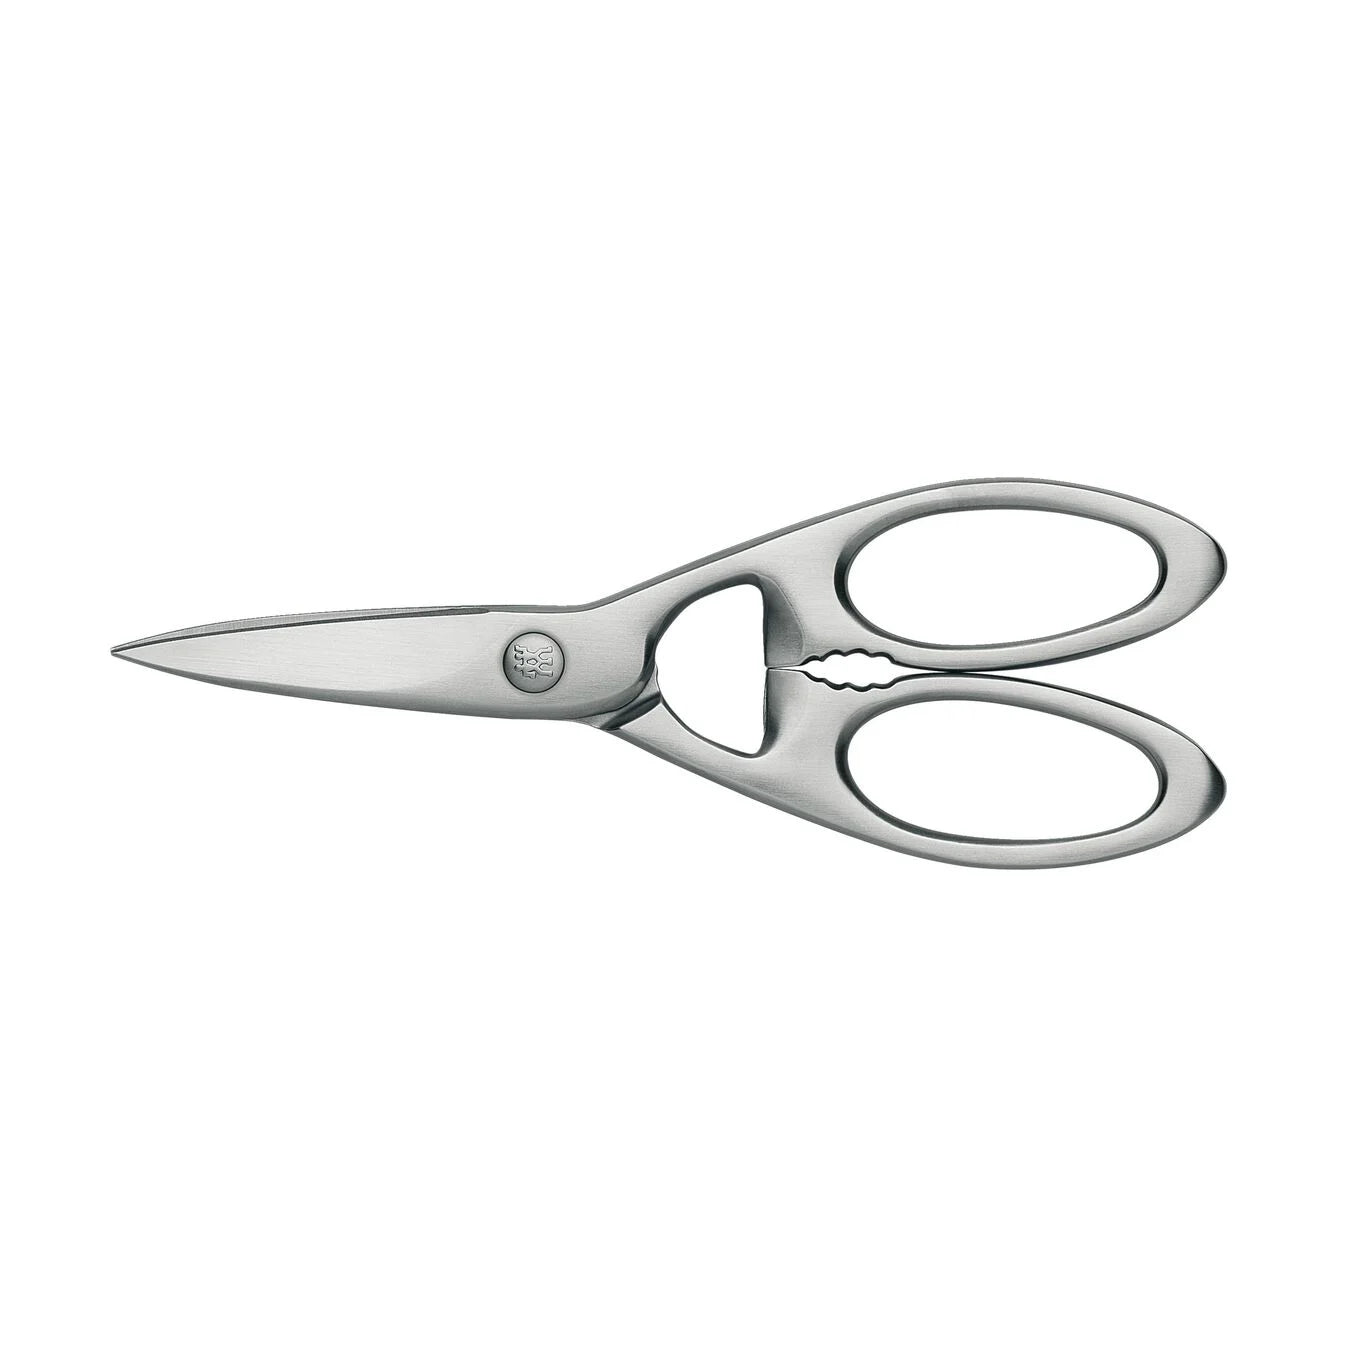 Shears - Twin Select - Stainless Steel